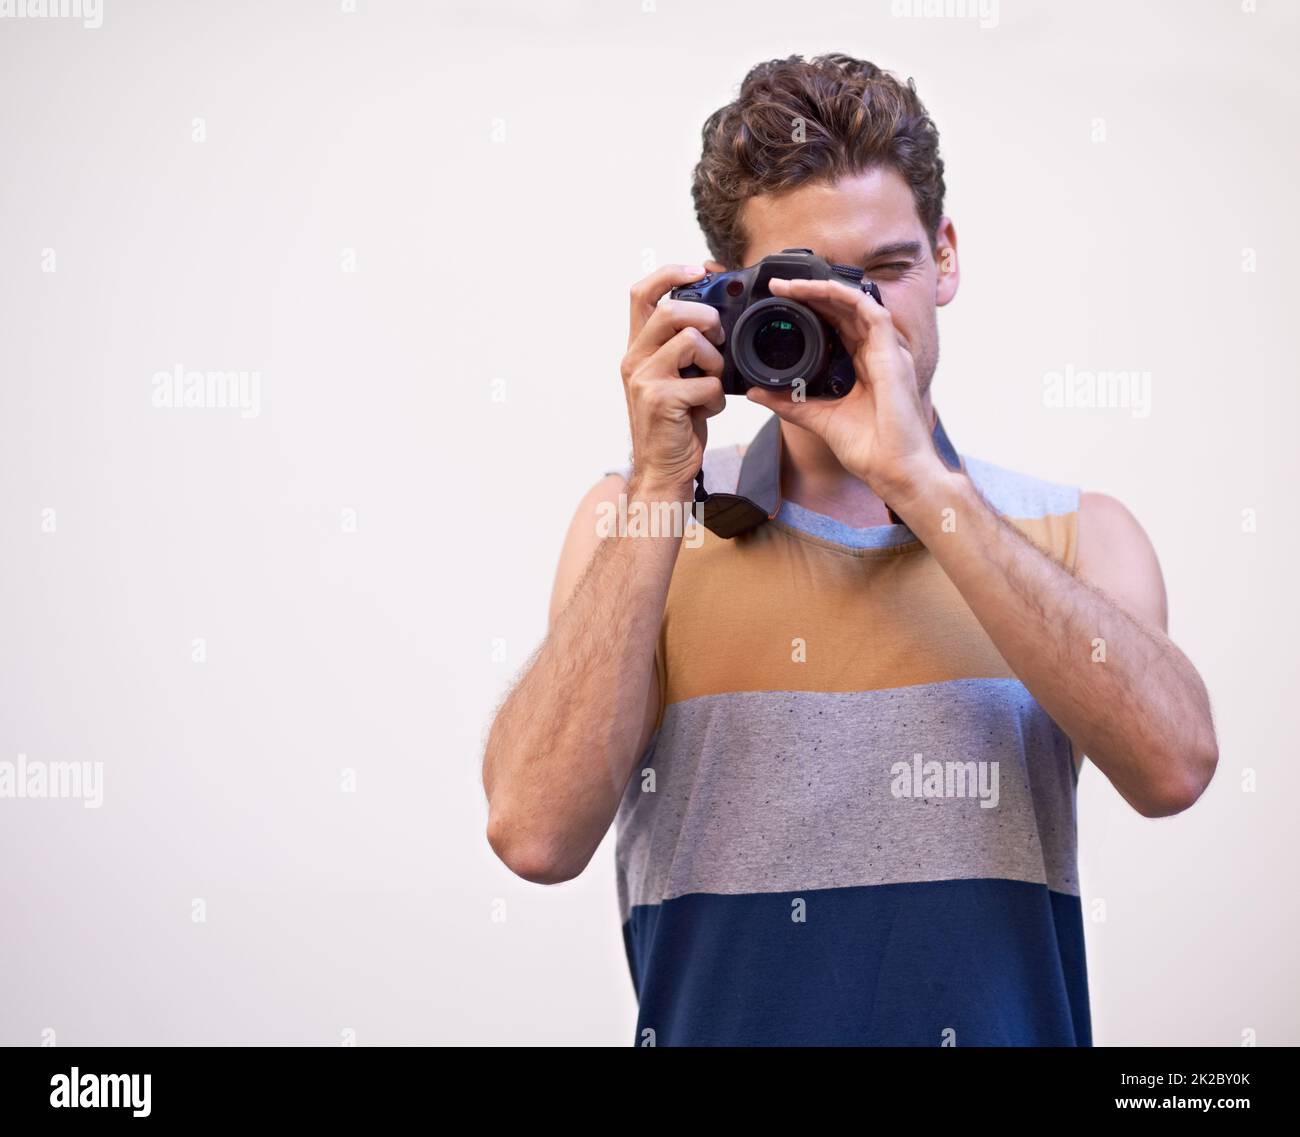 Hes got you framed. Young man taking a photograph of you. Stock Photo